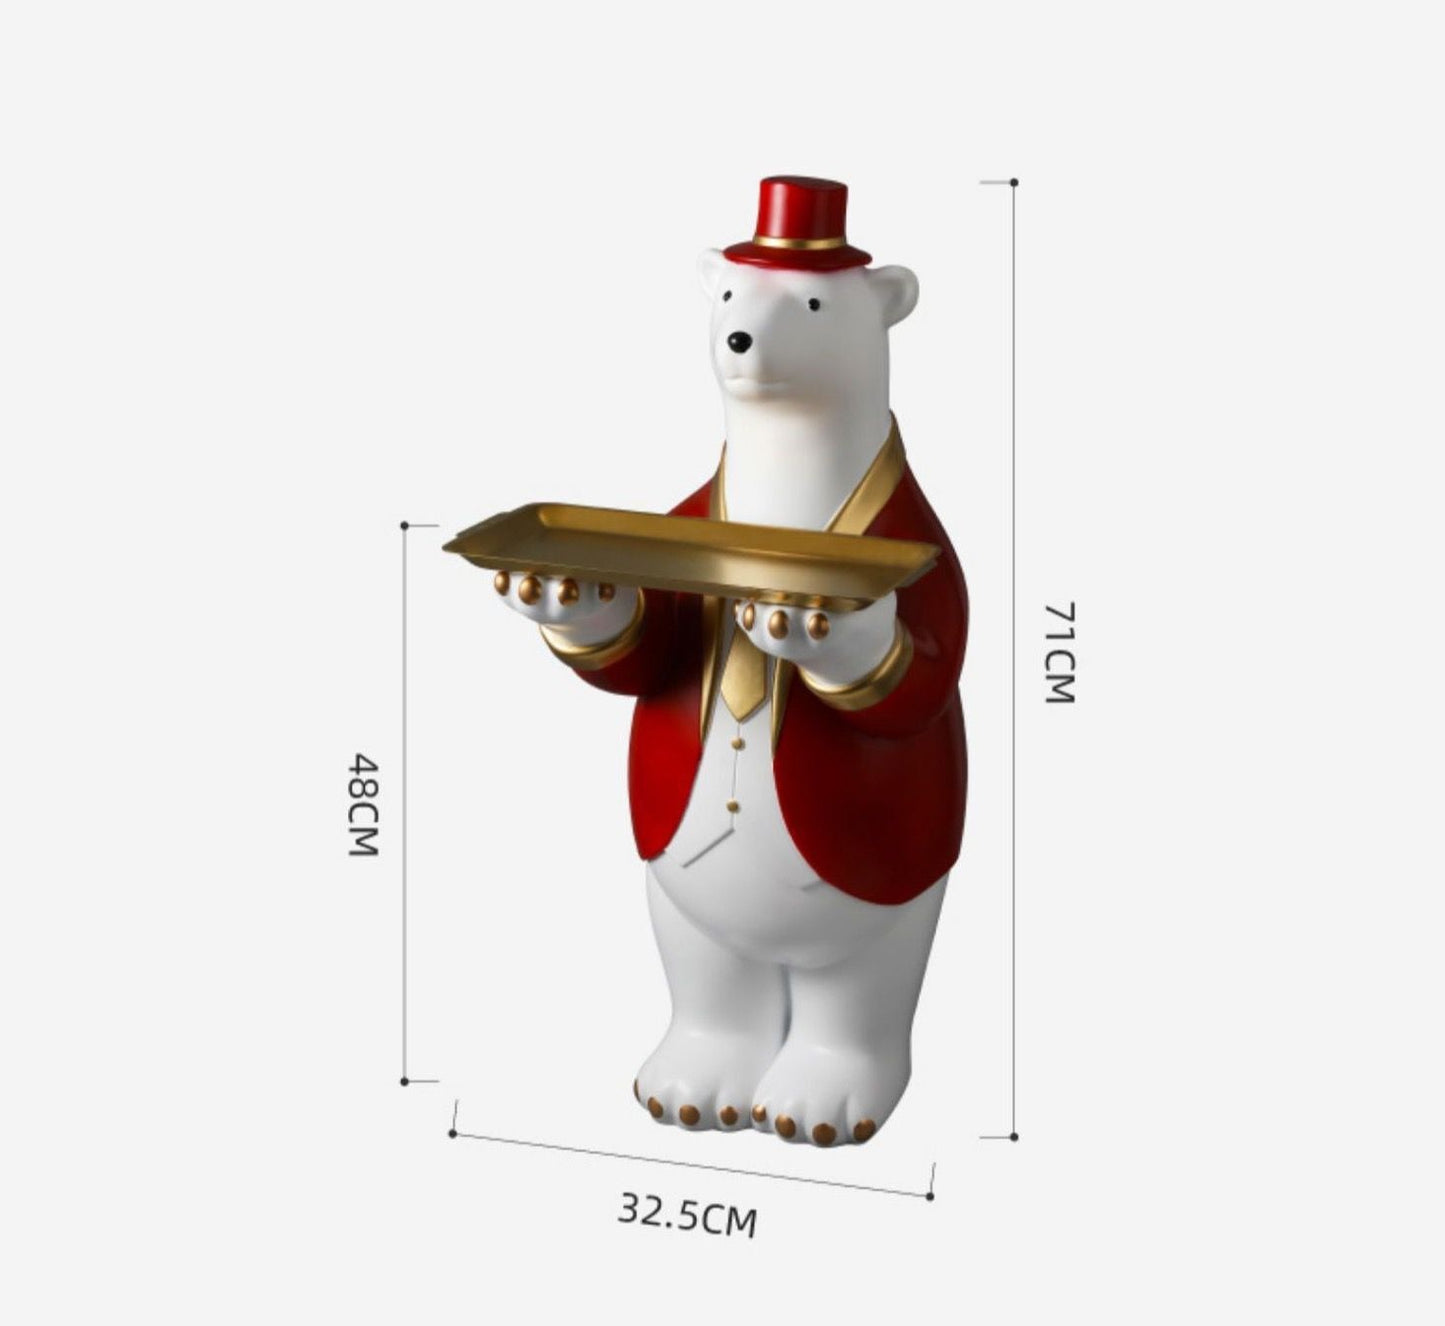 CORX Designs - Polar Bear Bell Boy Hotel Statue with Tray - Review